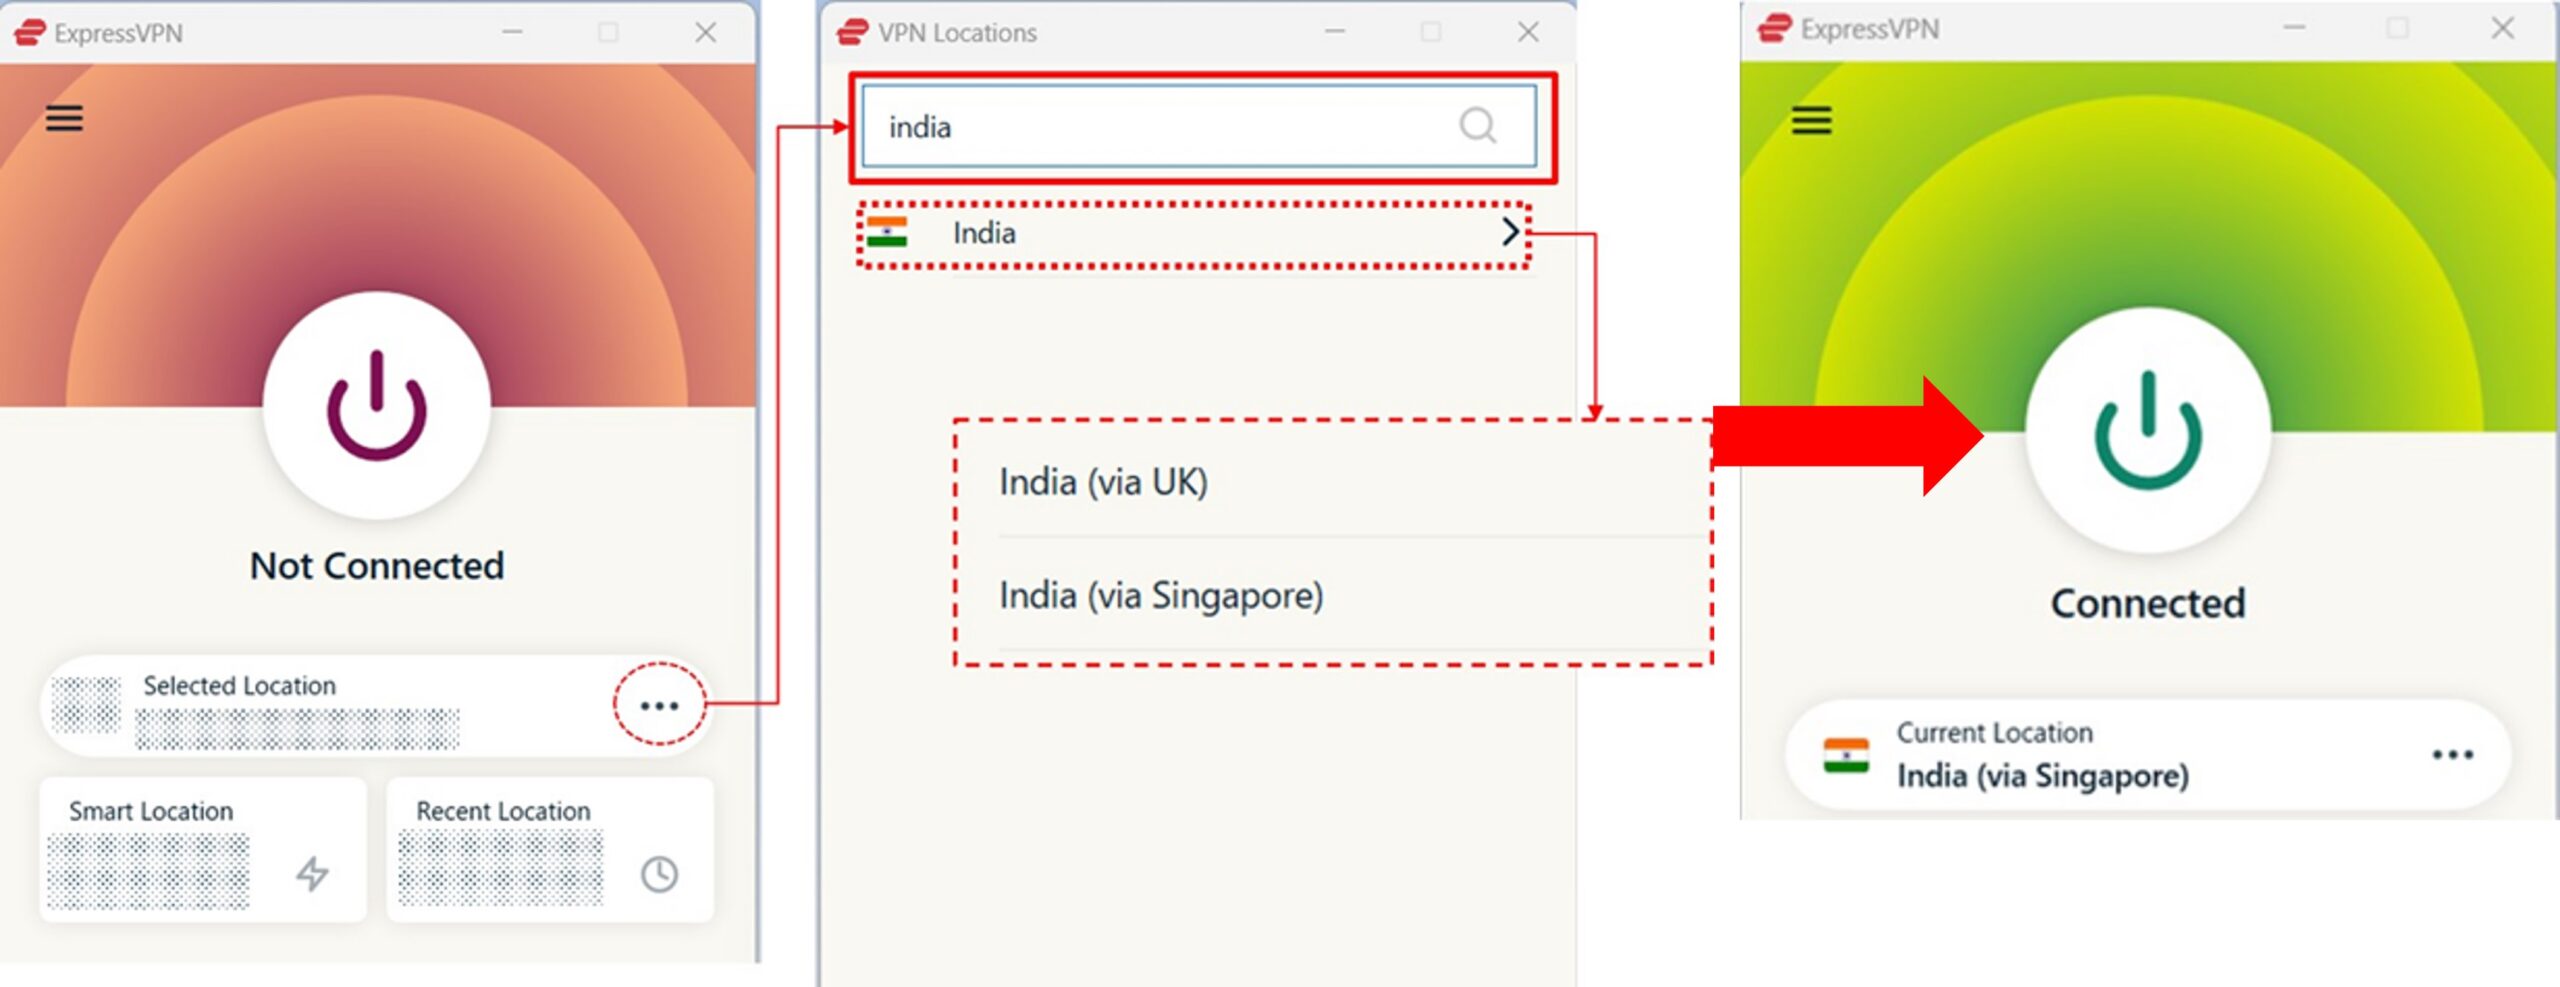 ExpressVPN Connection to India